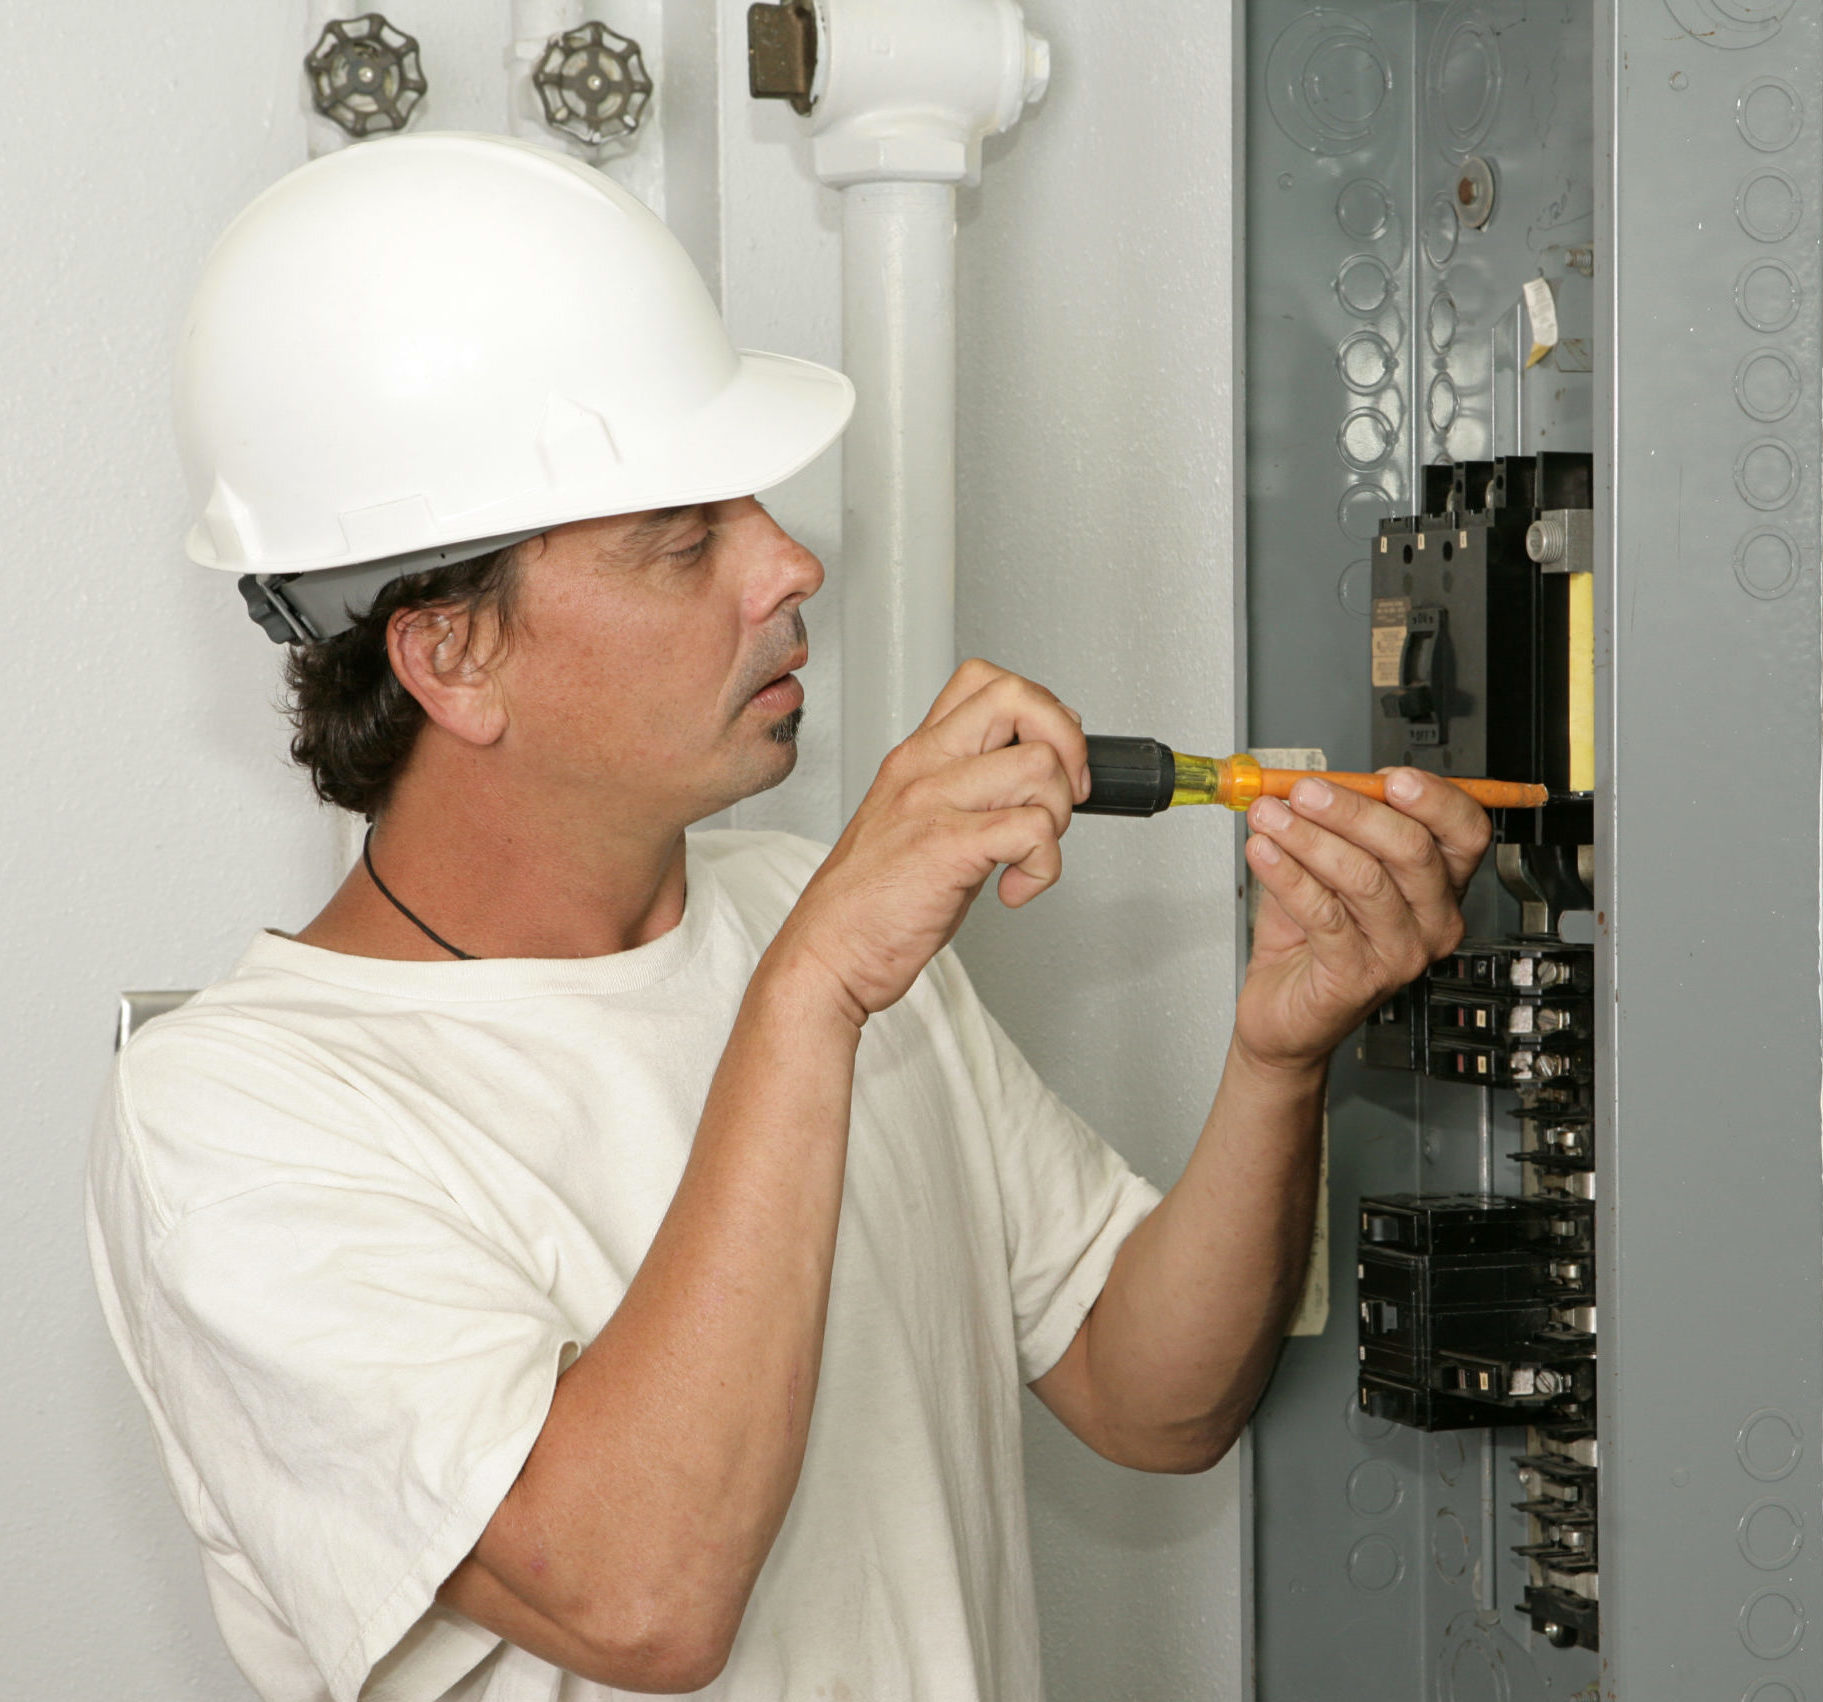 Electrician in white tee and white hardhat makes adjustments on fray electrical panel